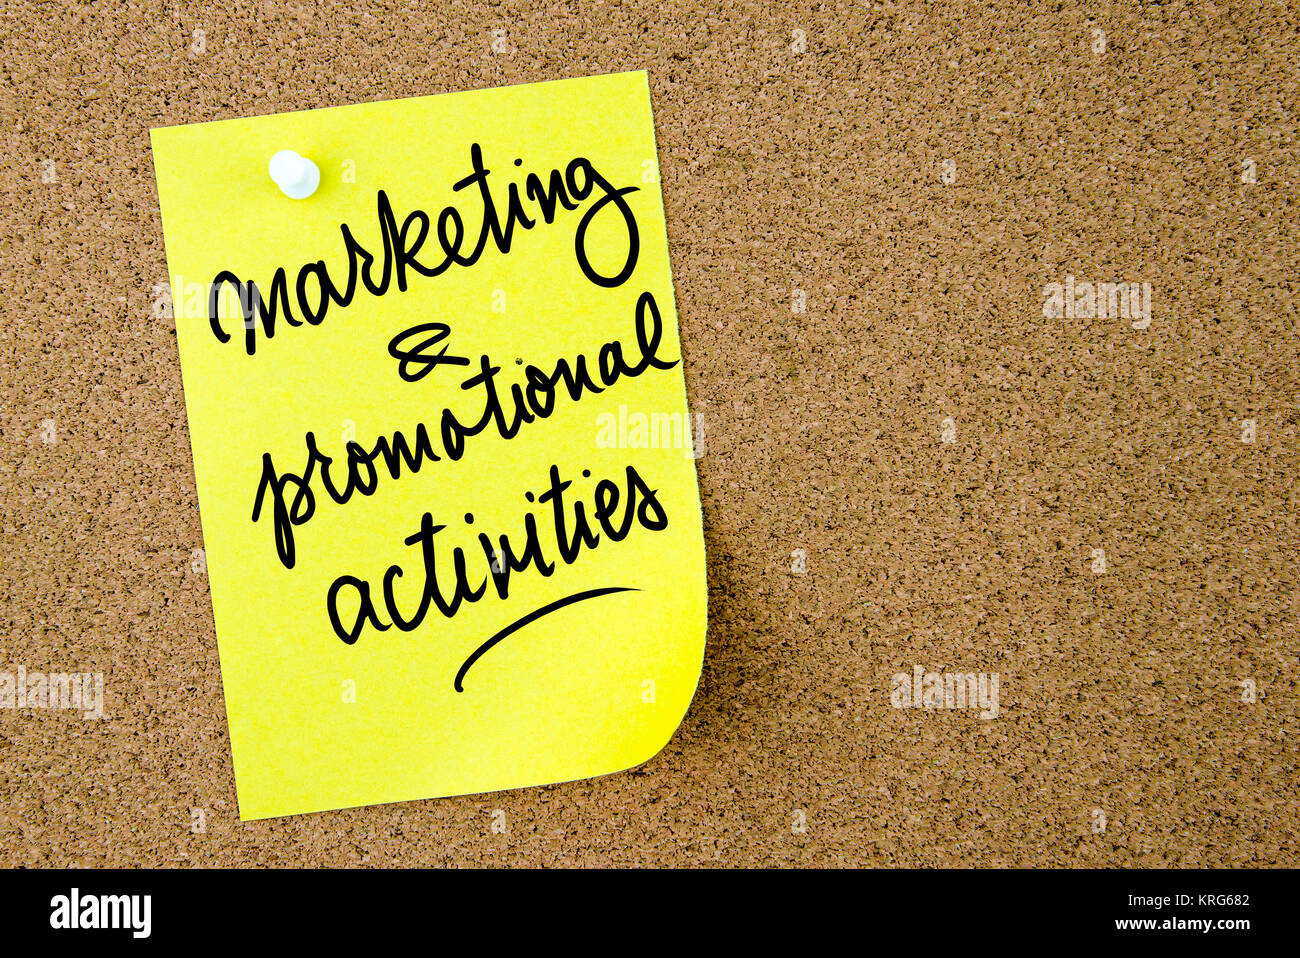 Marketing and Promotional Activities text written on yellow paper note Stock Photo